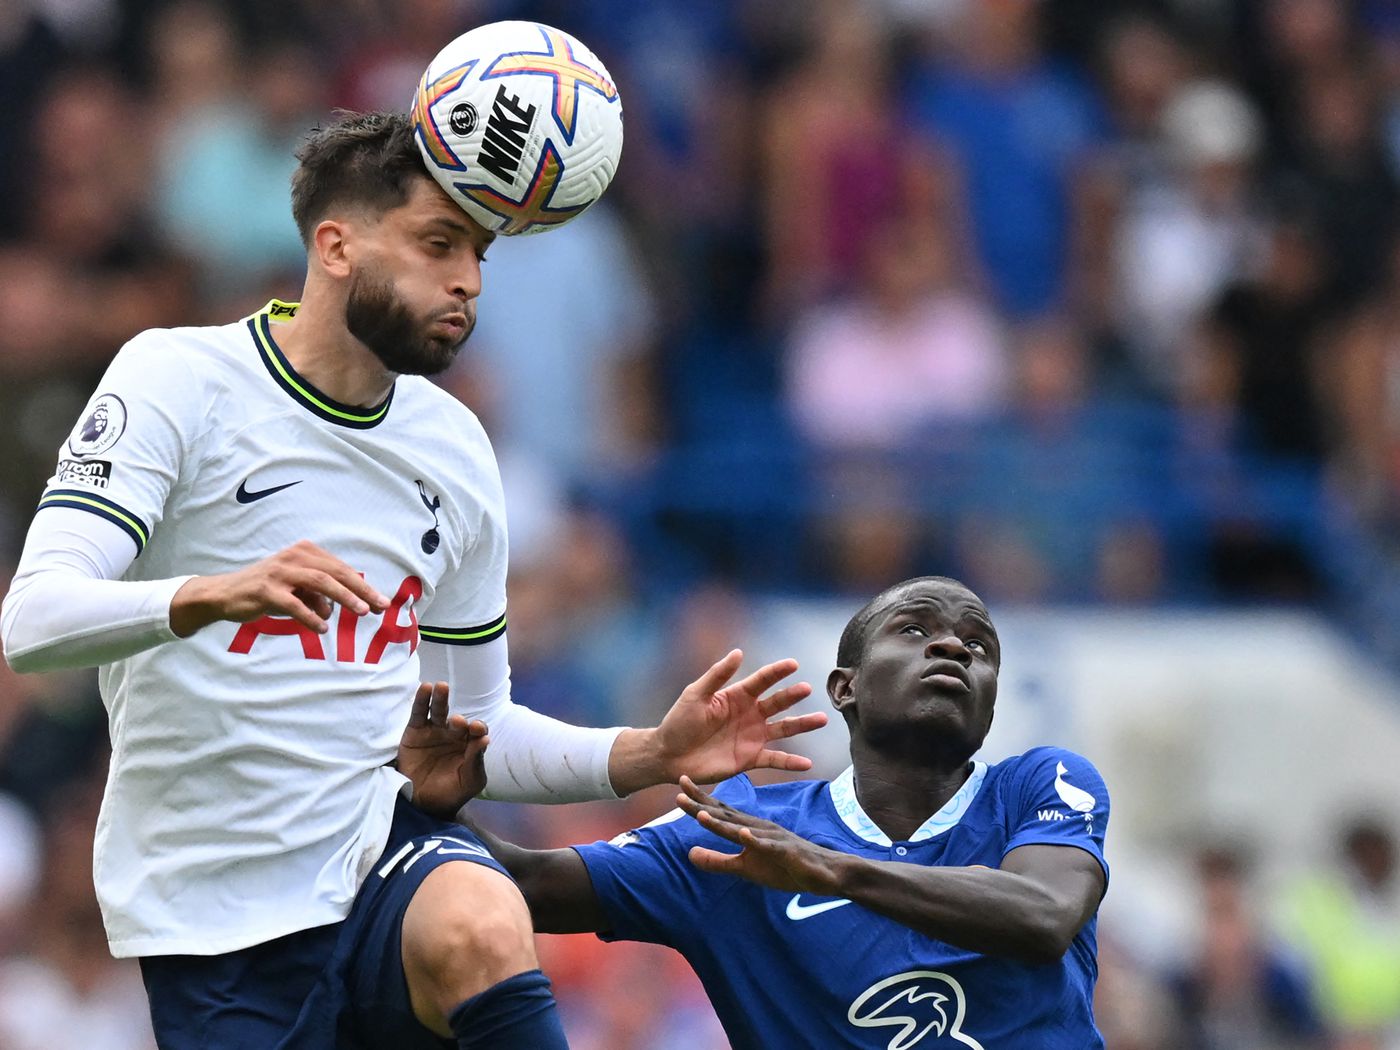 Chelsea 2-2 Tottenham: Player ratings to the theme of team names in Carty  Free's fantasy league - Cartilage Free Captain